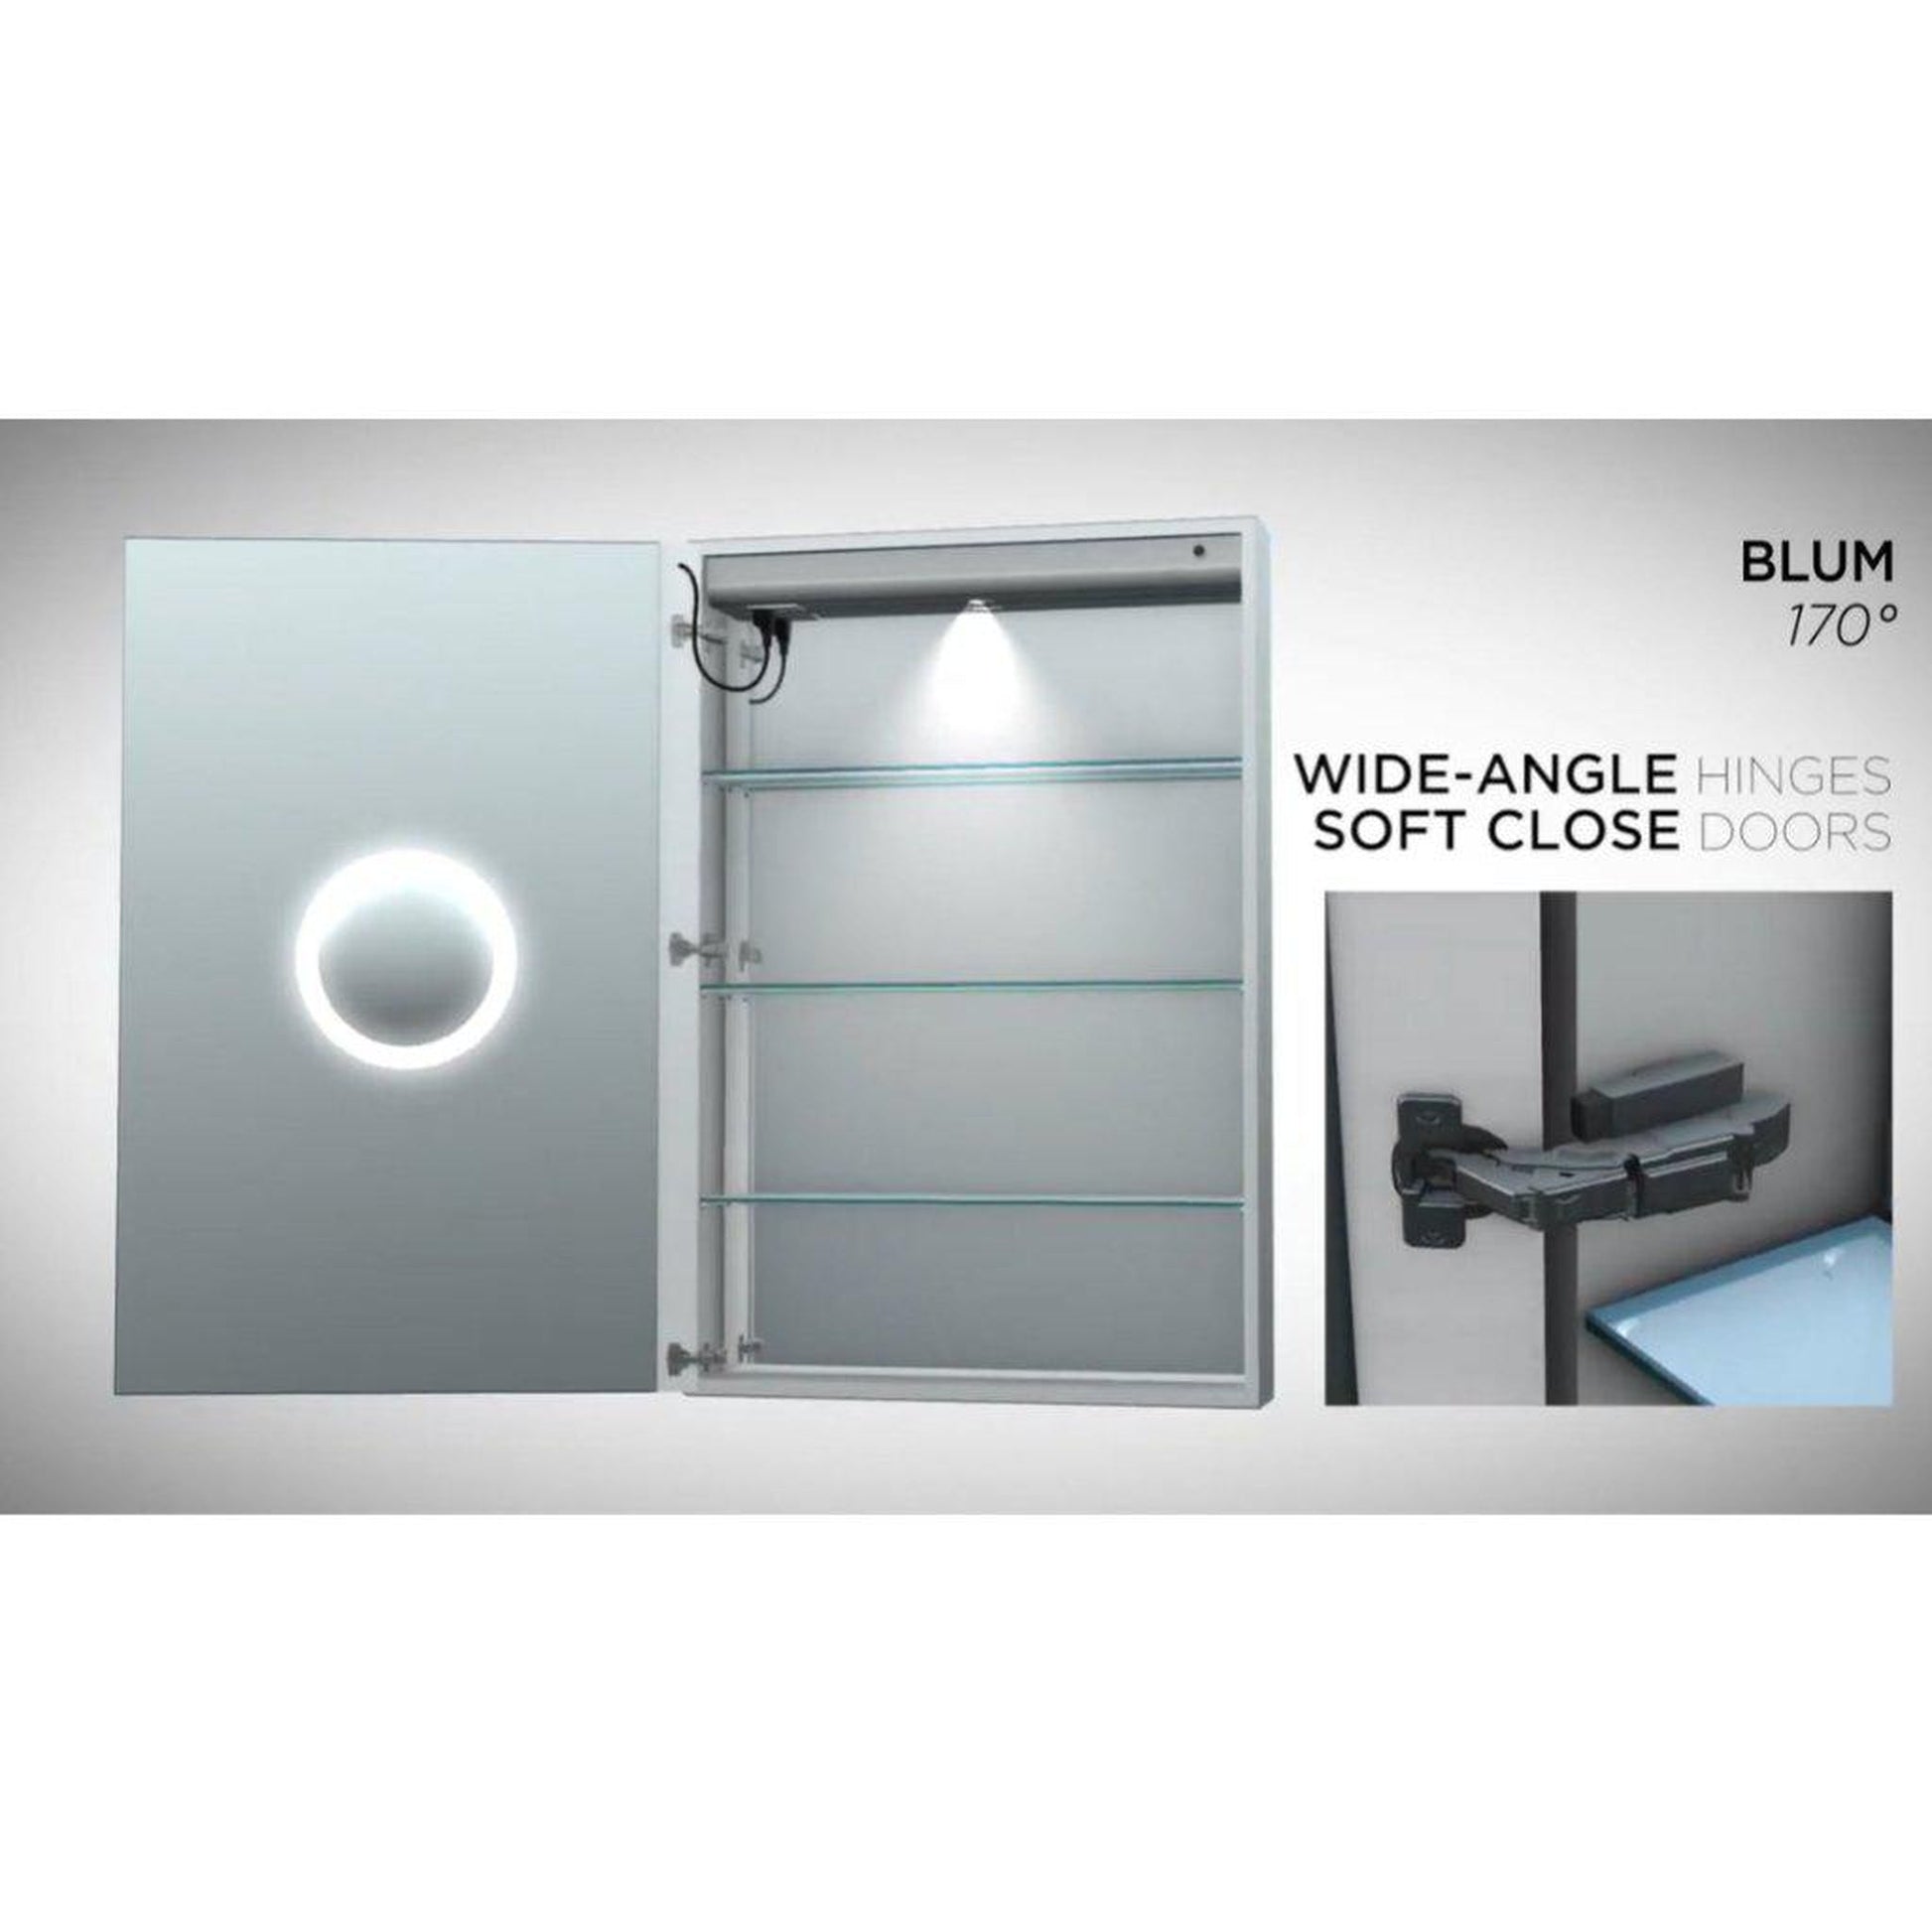 Krugg Reflections Svange 120" x 42" 5000K Double Hexa-View Left-Left-Left-Right-Right-Right Opening Recessed/Surface-Mount Illuminated Silver Backed LED Medicine Cabinet Mirror With Built-in Defogger, Dimmer and Electrical Outlet